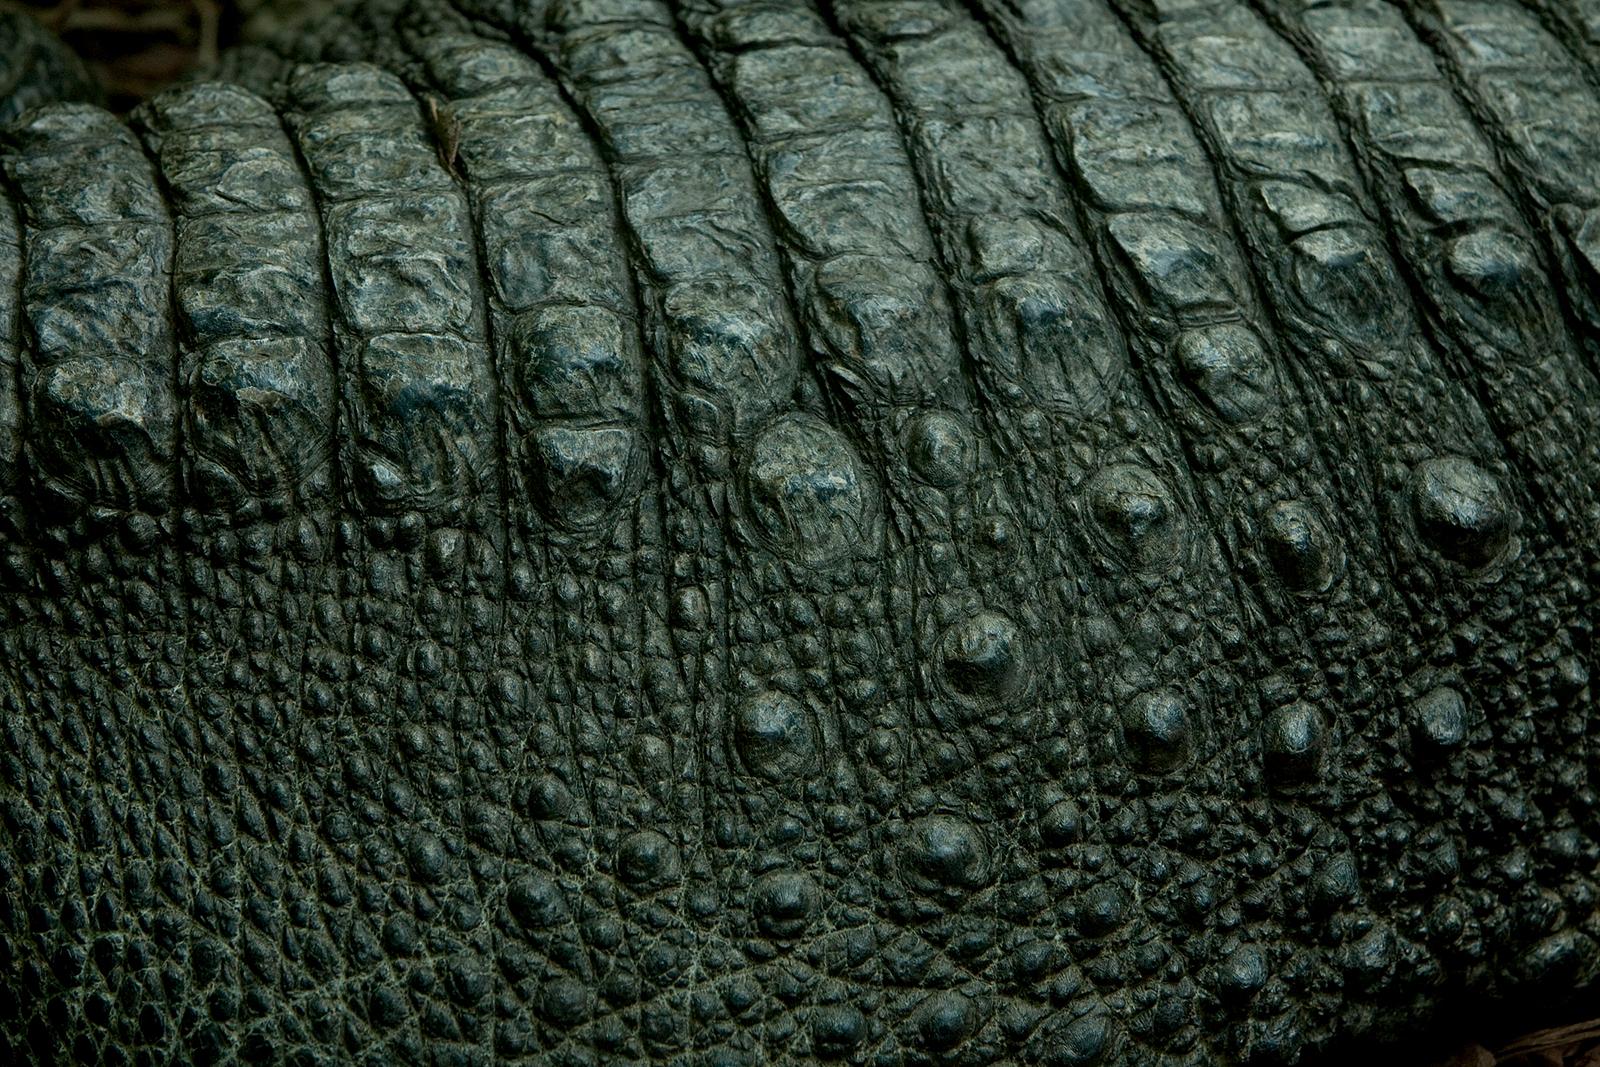 Alligator skin This one would likely bite back 1600x1067